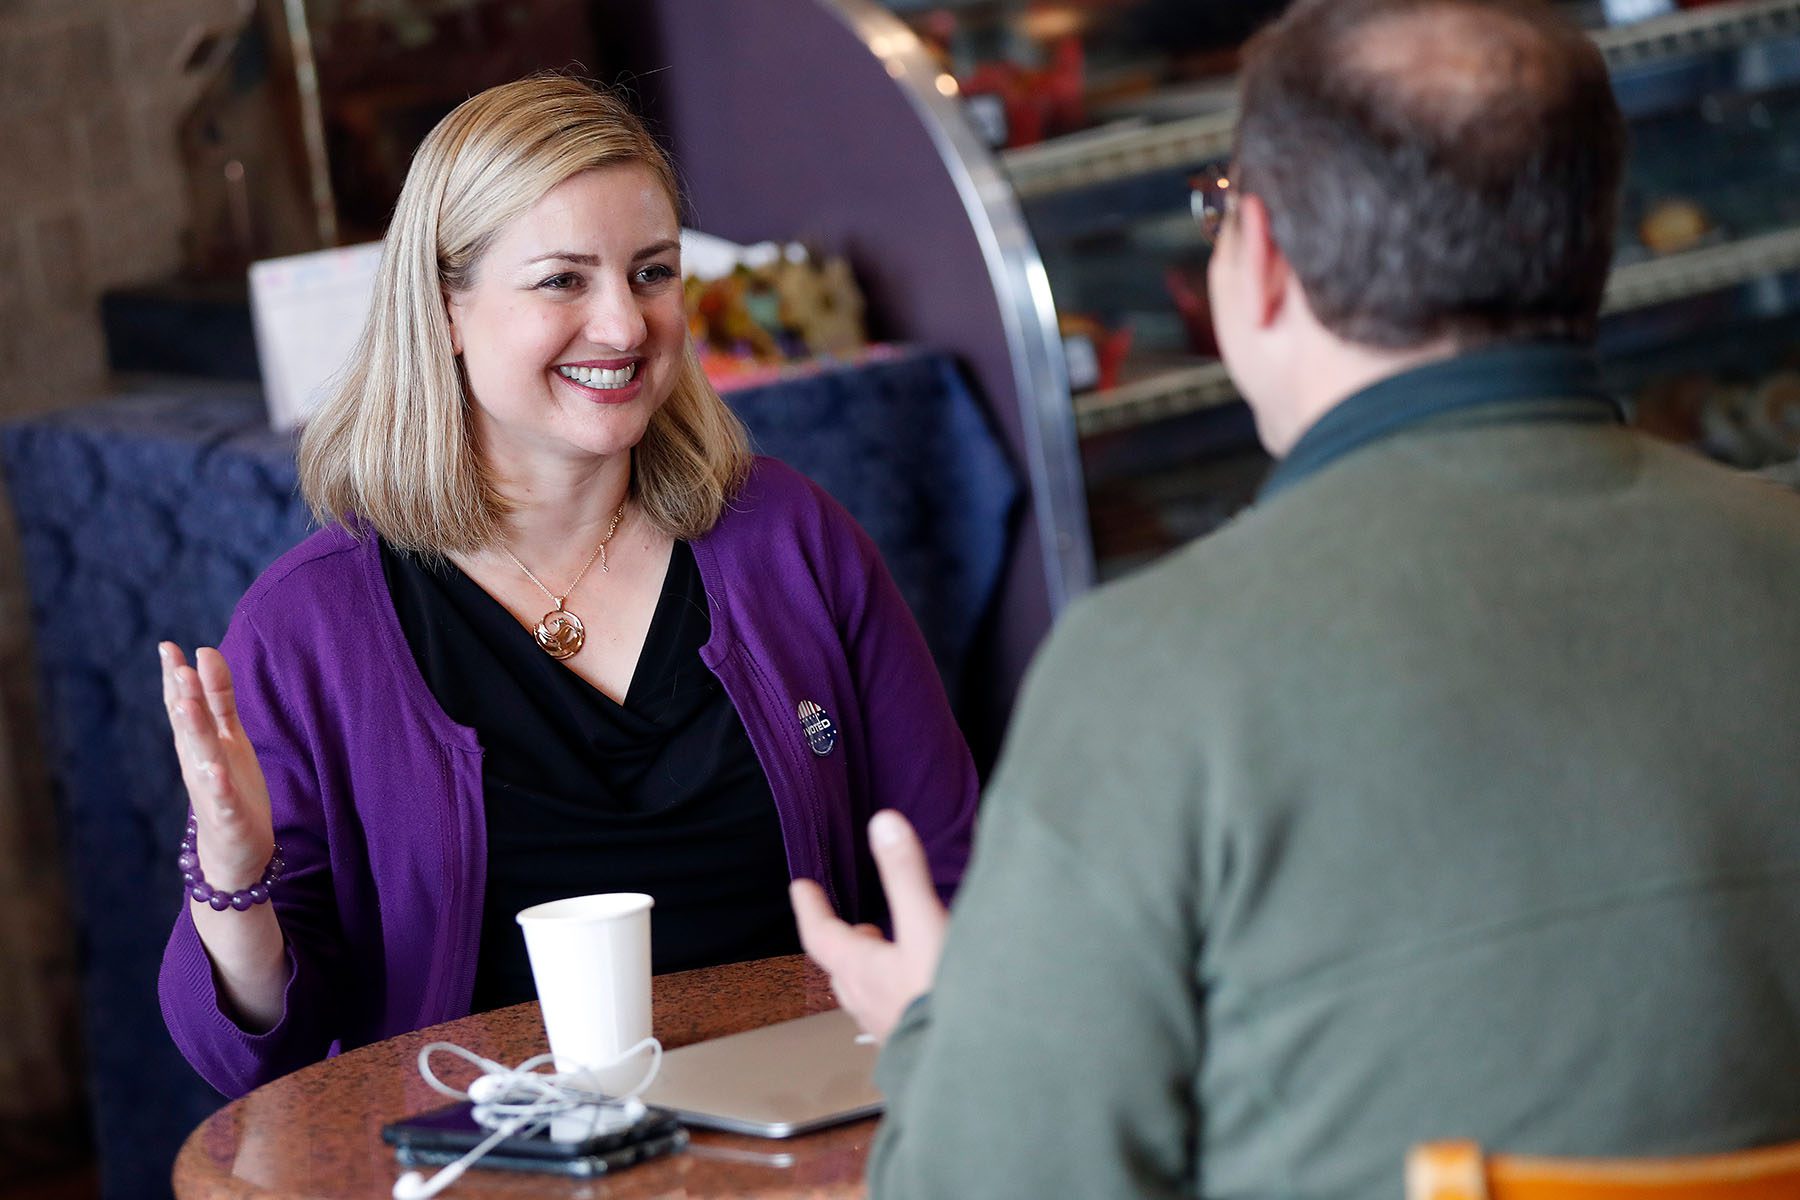 Kate Gallego speaks to a constituant at a coffee shop.